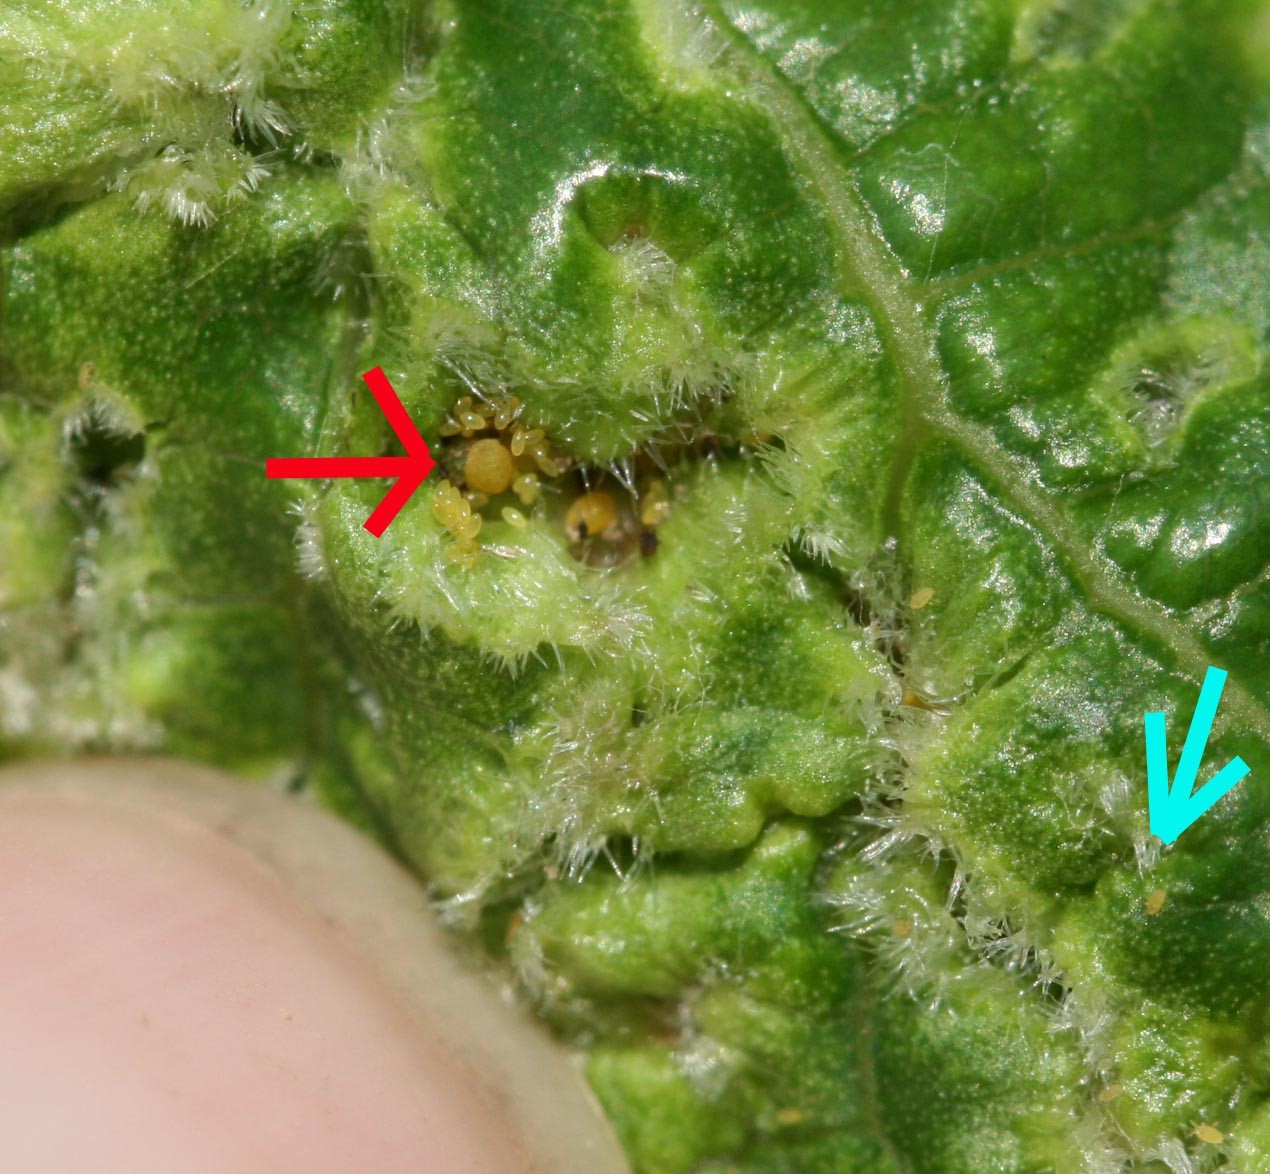 Close up view of a grapevine leaf with phylloxera eggs and adults in it